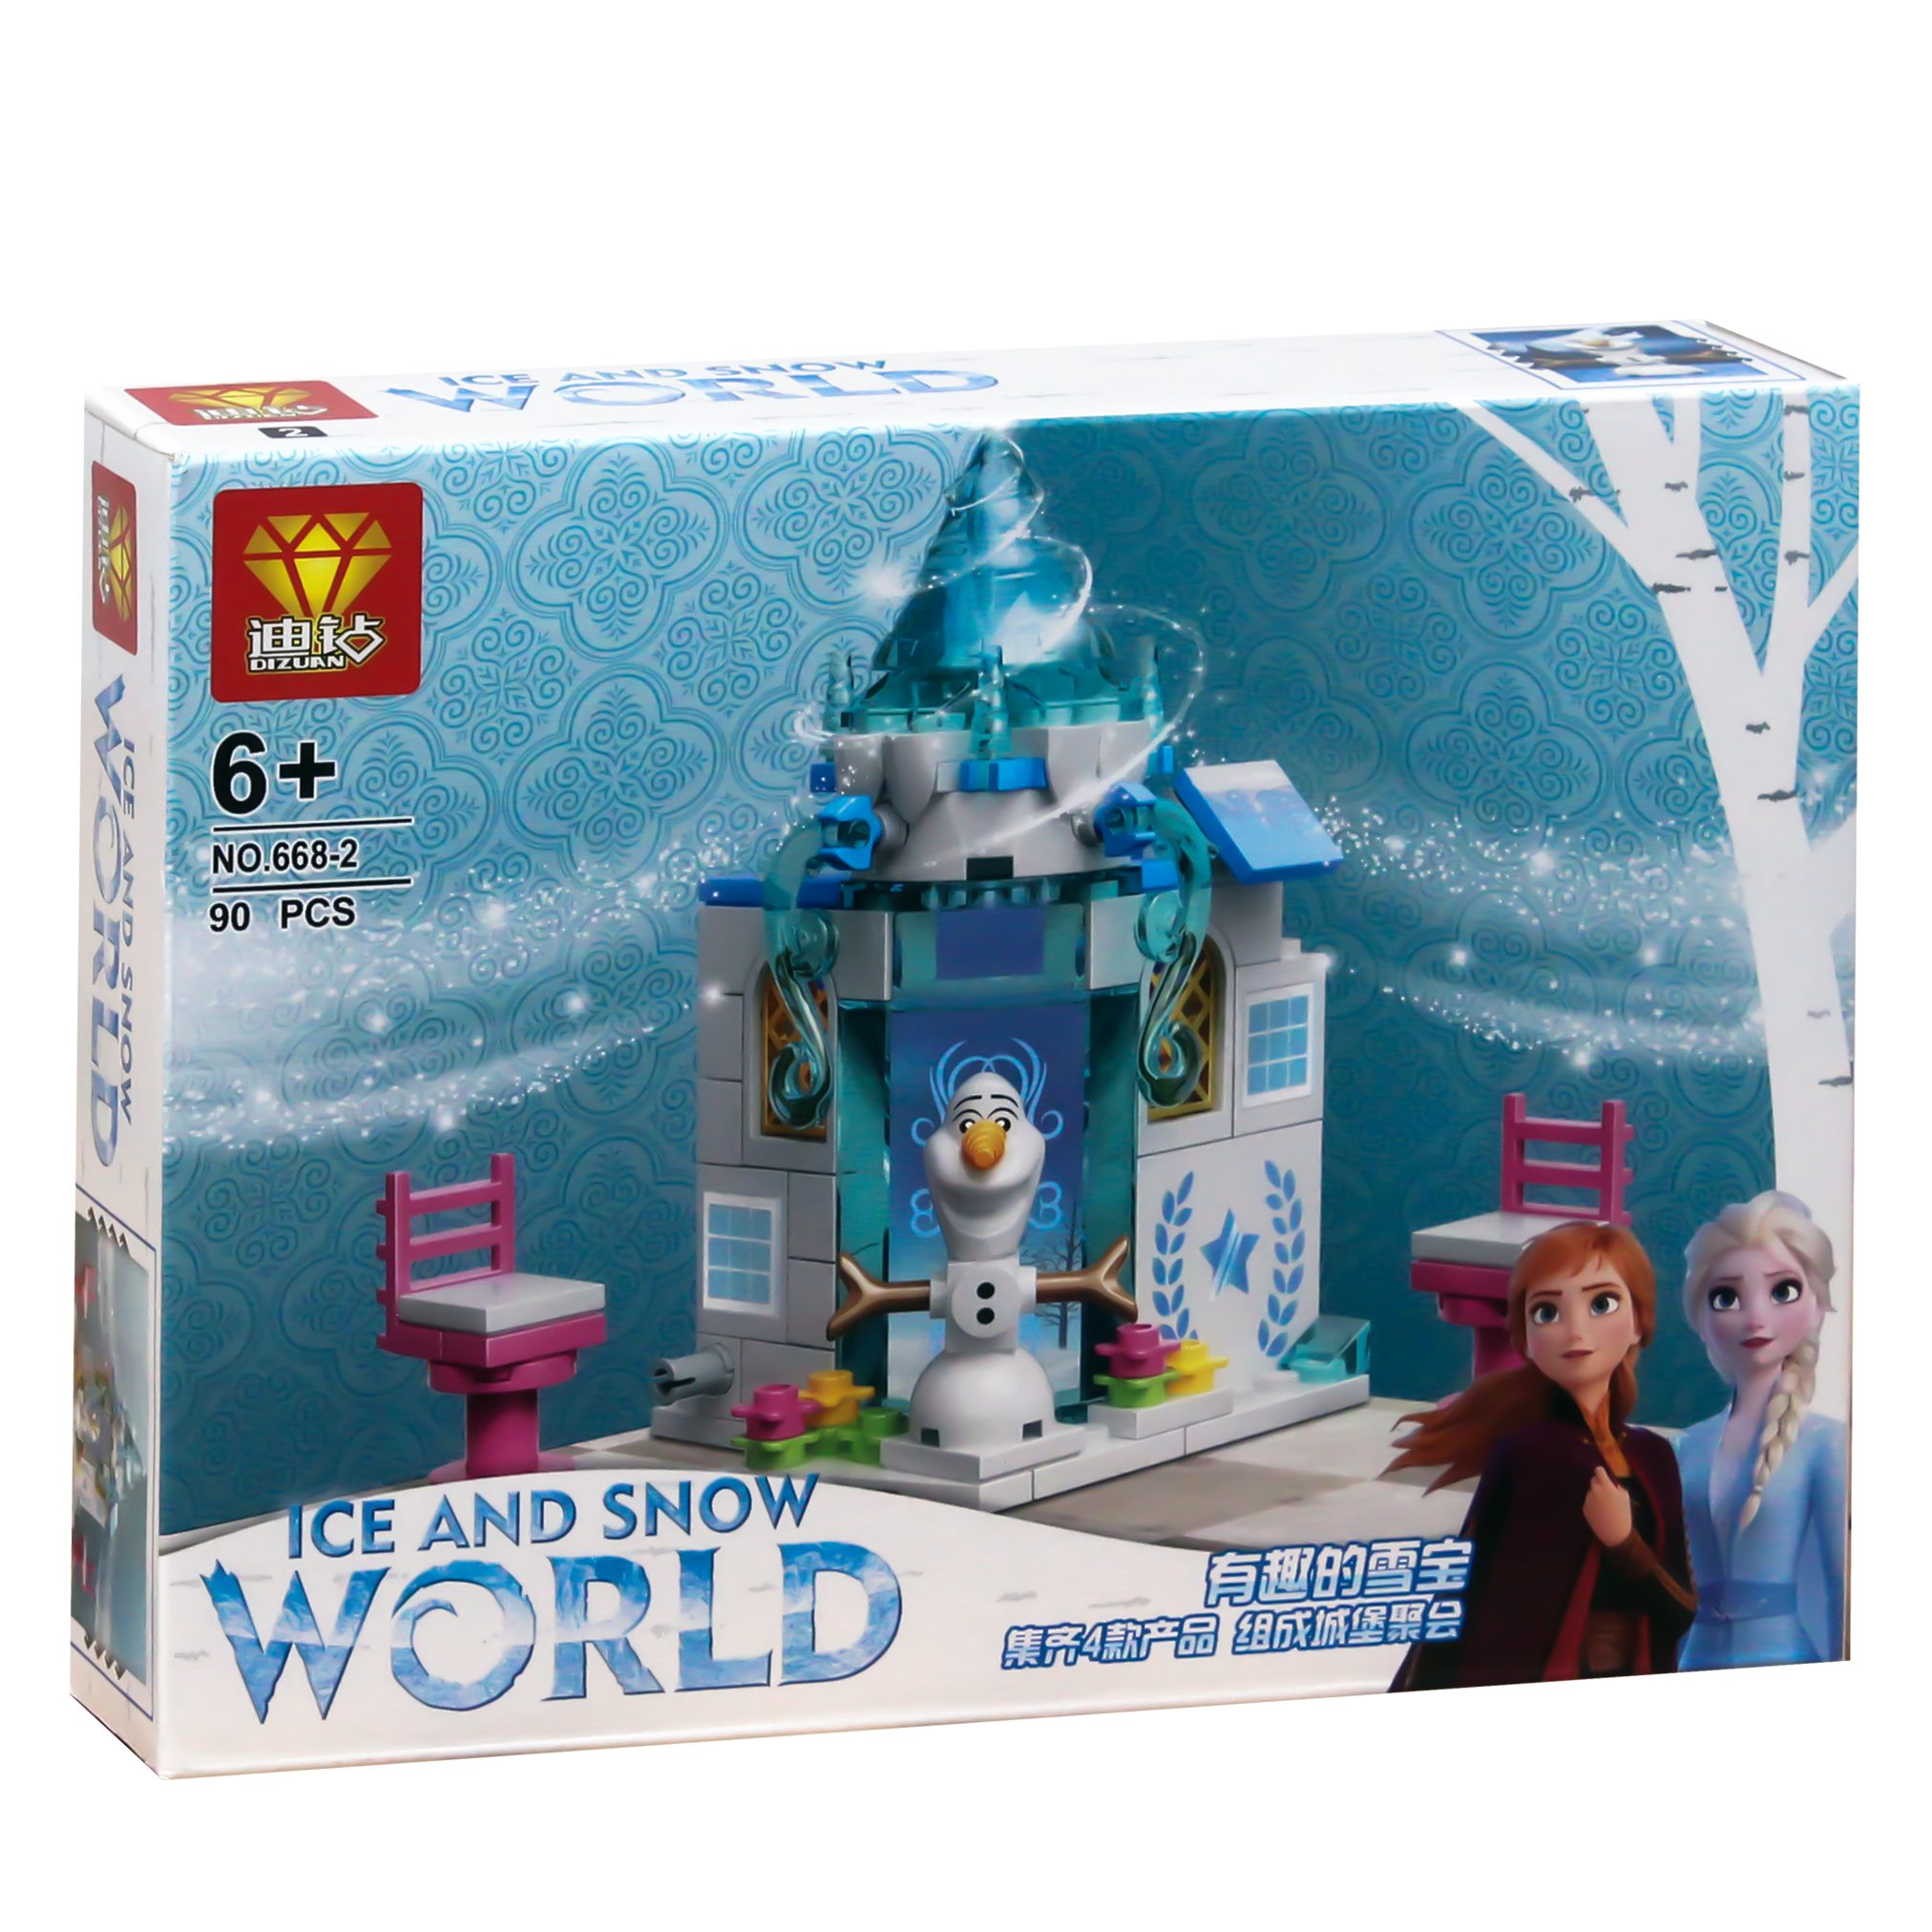 Frozen Princess Ice And Snow World Building Blocks 90 Pieces - 668-2